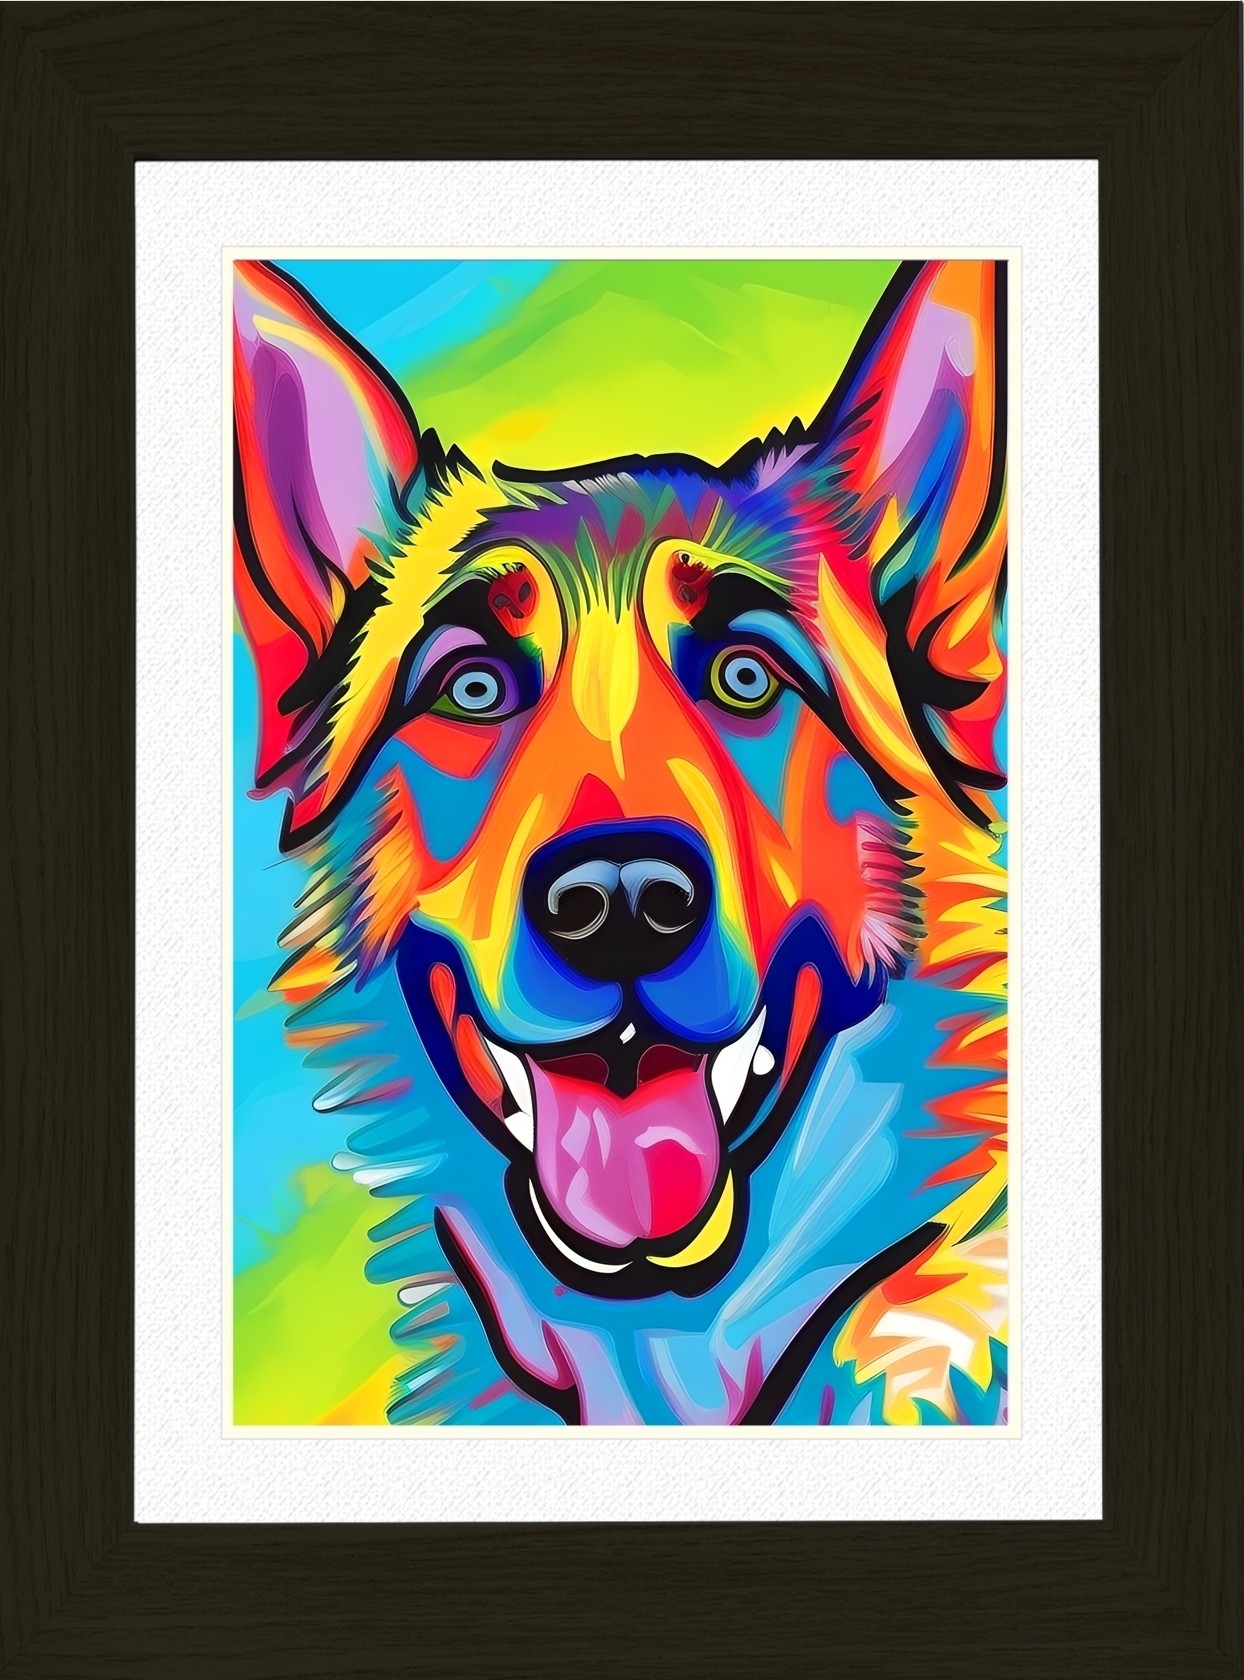 German Shepherd Dog Picture Framed Colourful Abstract Art (A3 Black Frame)